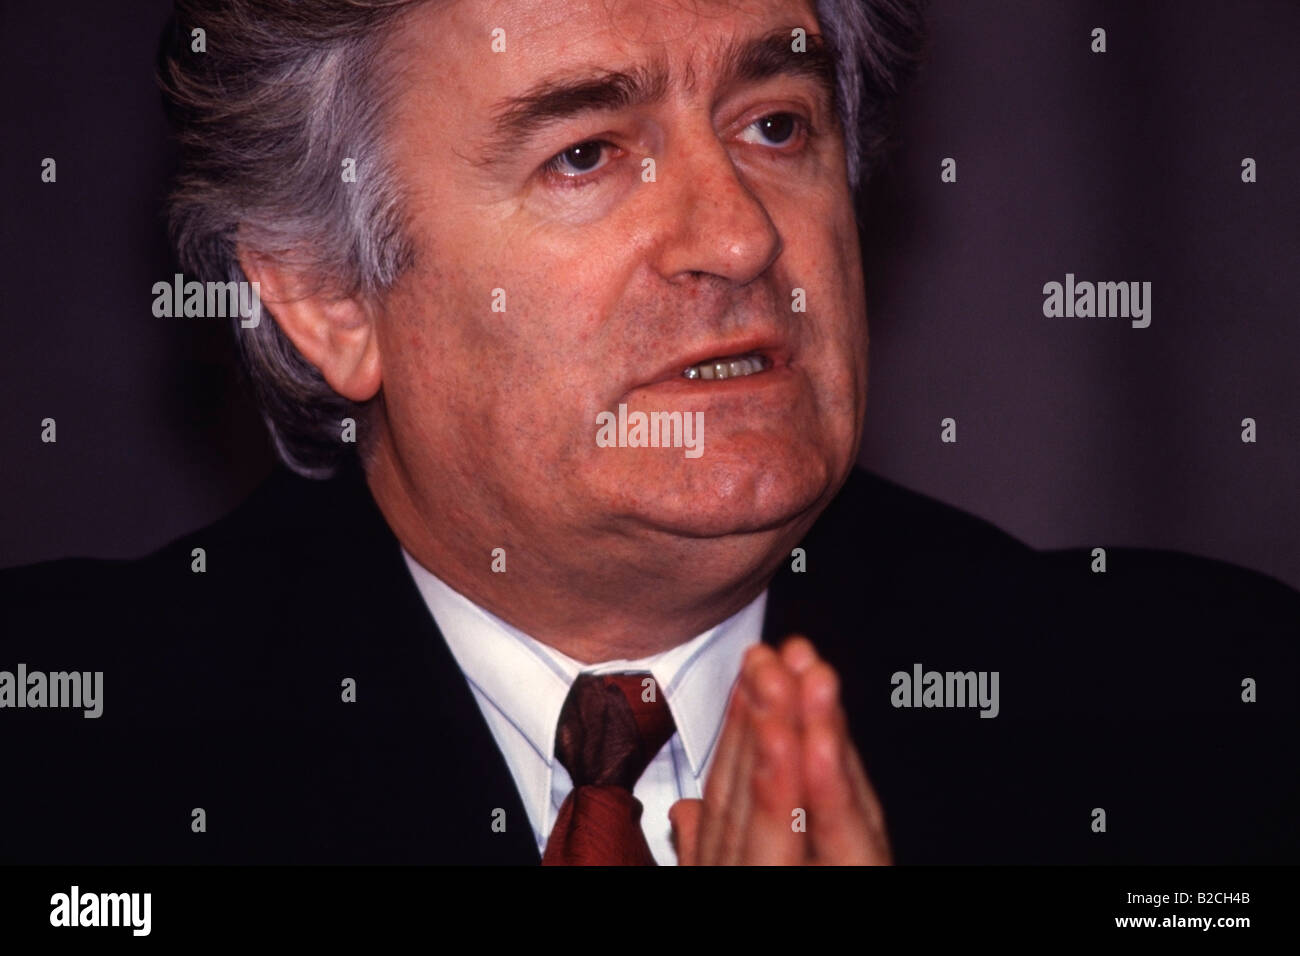 Radovan Karadzic, former Bosnian Serb leader, was convicted of crimes against humanity by a United Nations tribunal, 3/24/2016 Stock Photo